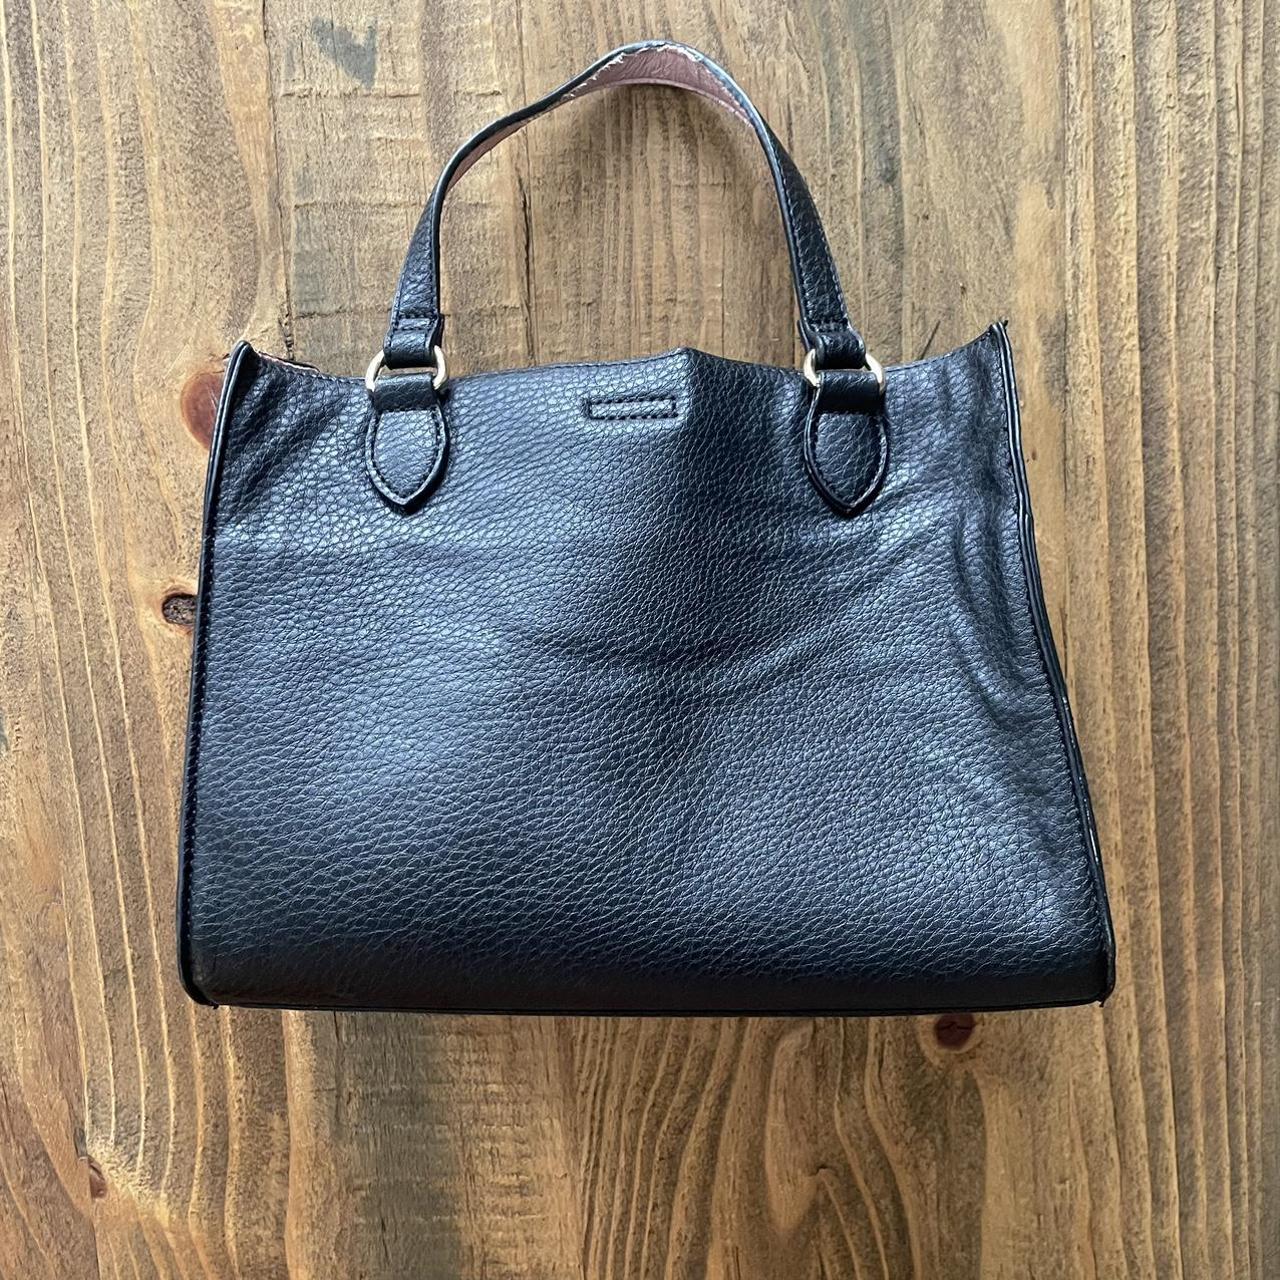 Anne Klein Work Tote With Pouch